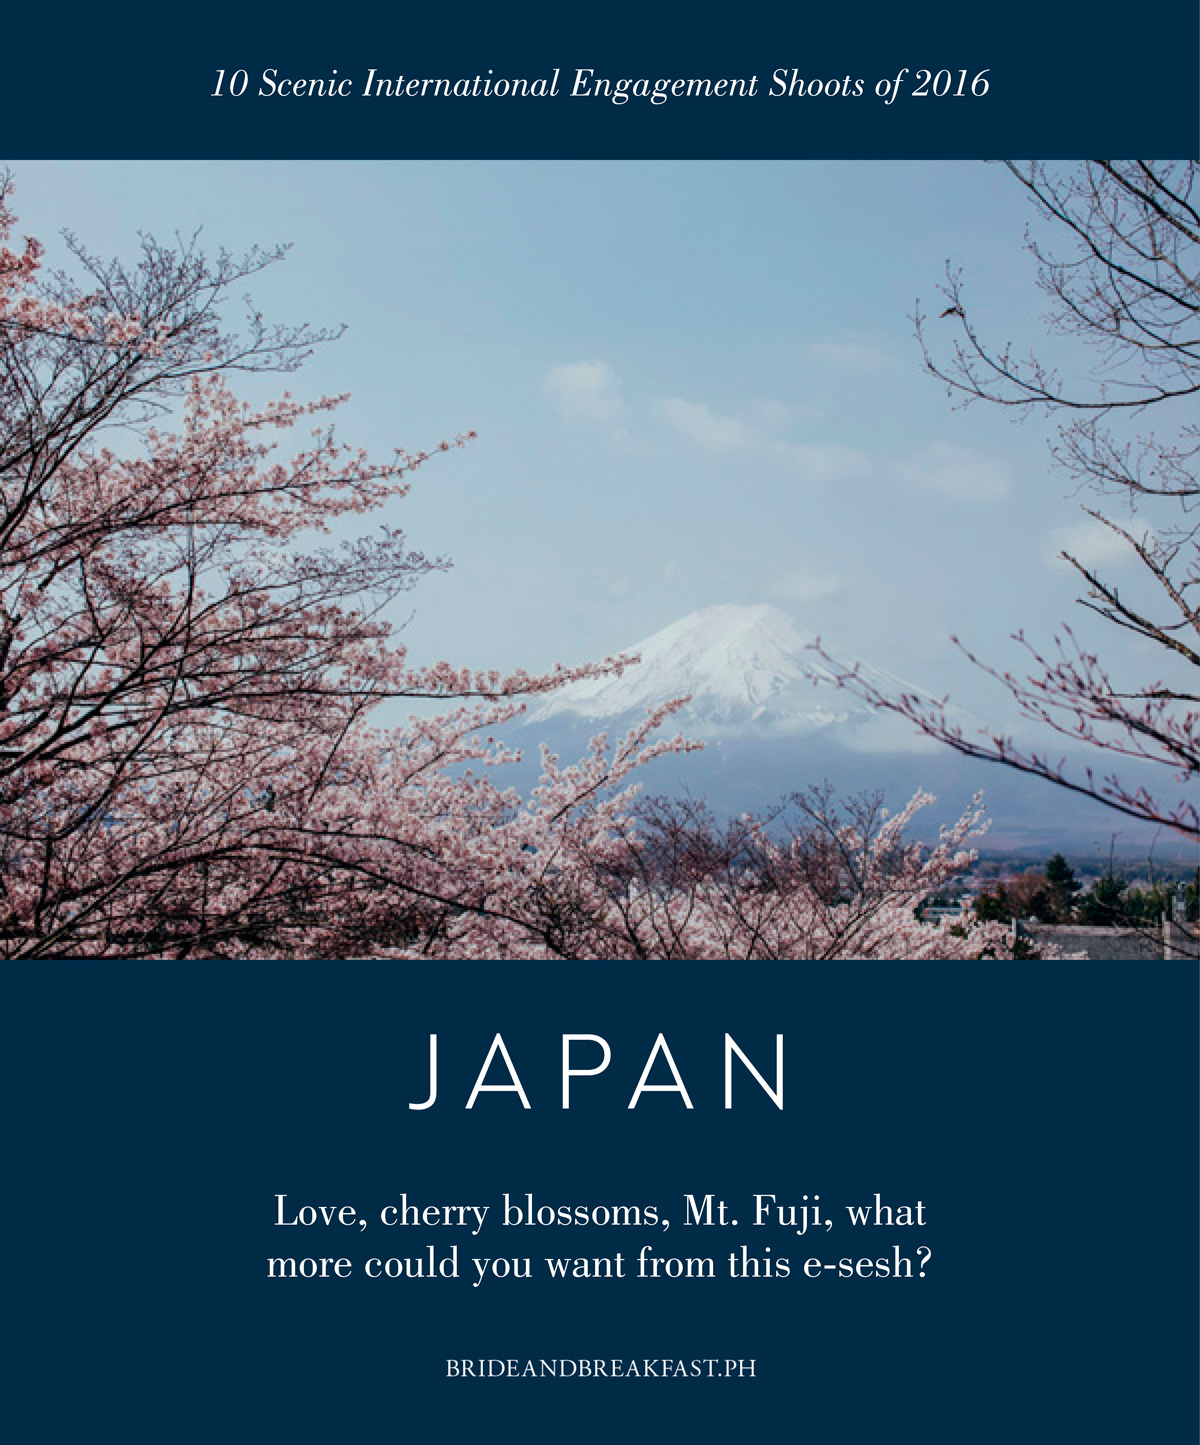 2. Japan Love, cherry blossoms, Mt. Fuji, what more could you want from this e-sesh?